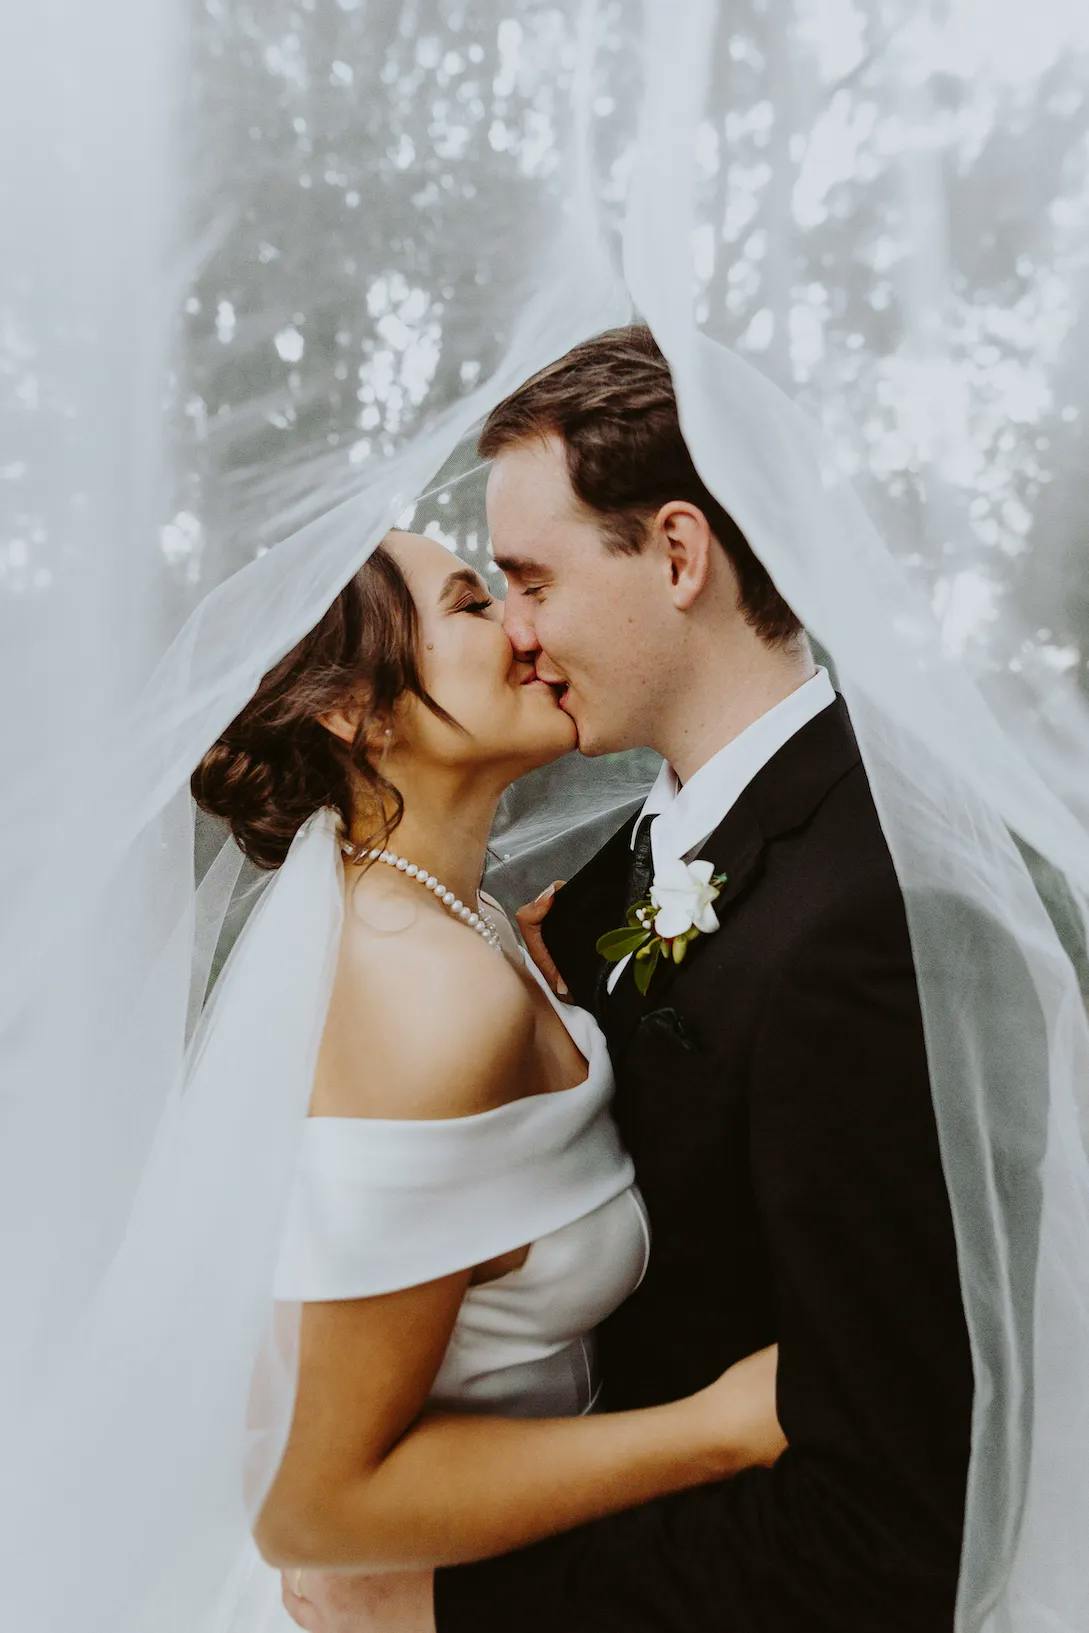 A bride and groom share a kiss under a sheer white veil. The bride is wearing an off-shoulder white gown and pearl necklace, while the groom is in a black suit with a white boutonniere. The soft lighting creates a dreamy, intimate atmosphere.